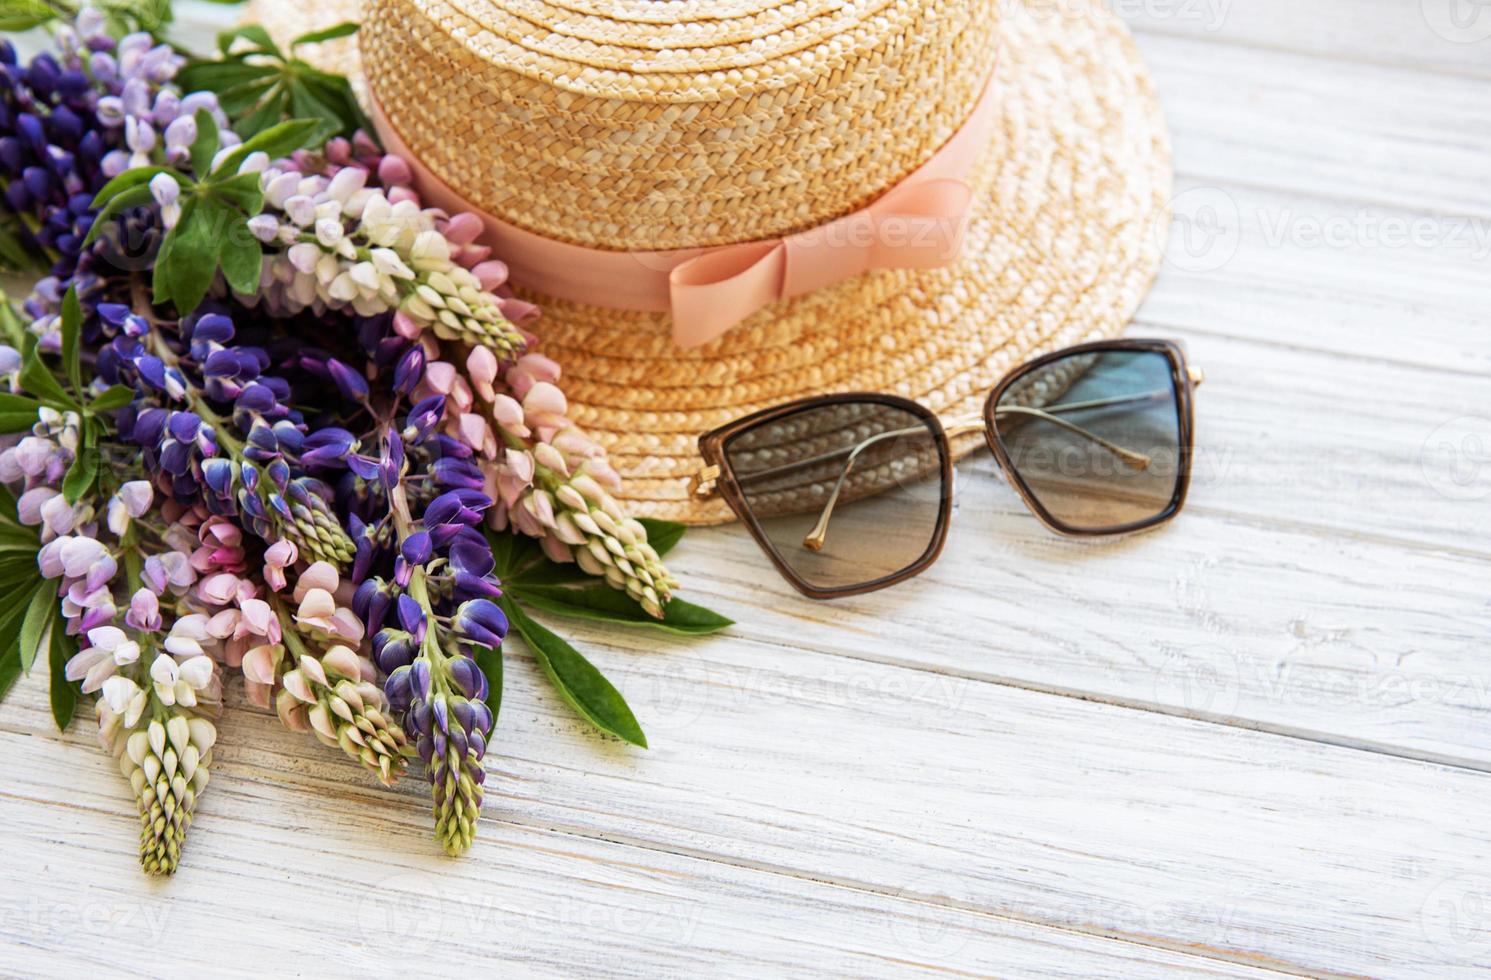 Straw hat and lupine flowers photo